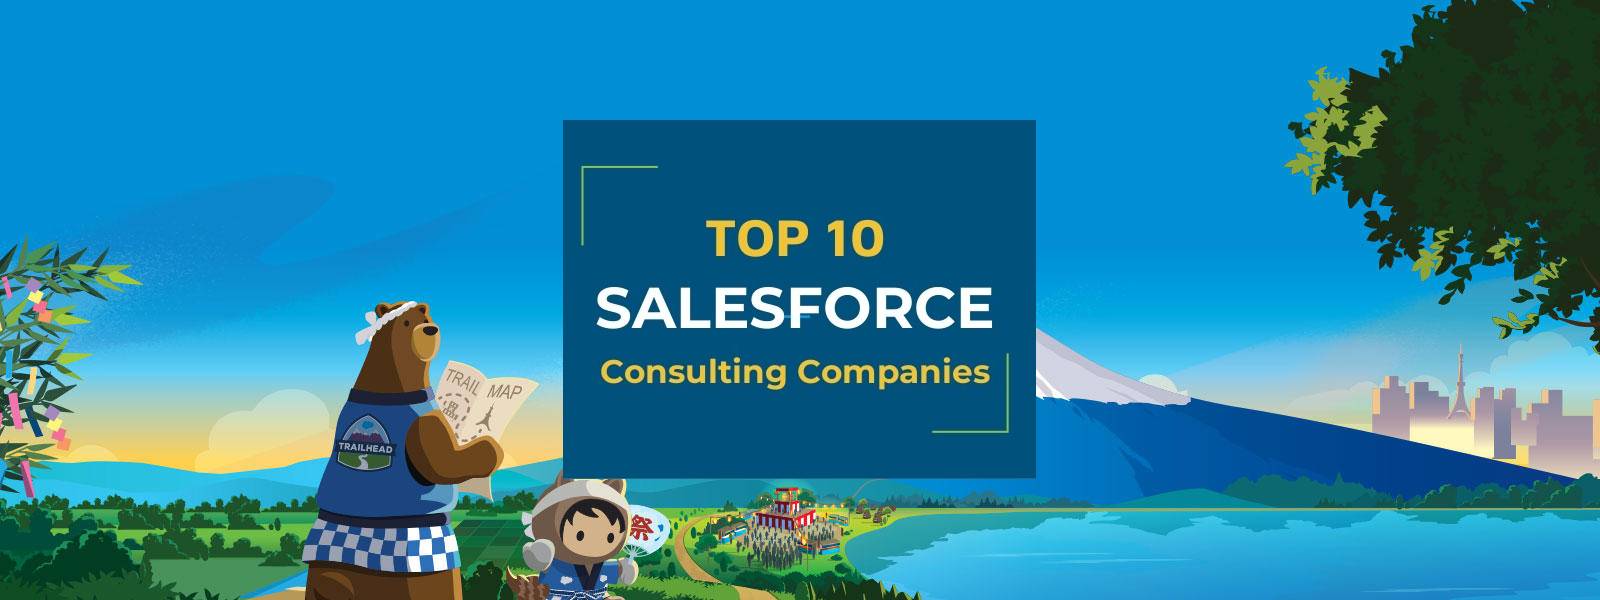 top-10-salesforce-consulting-companies